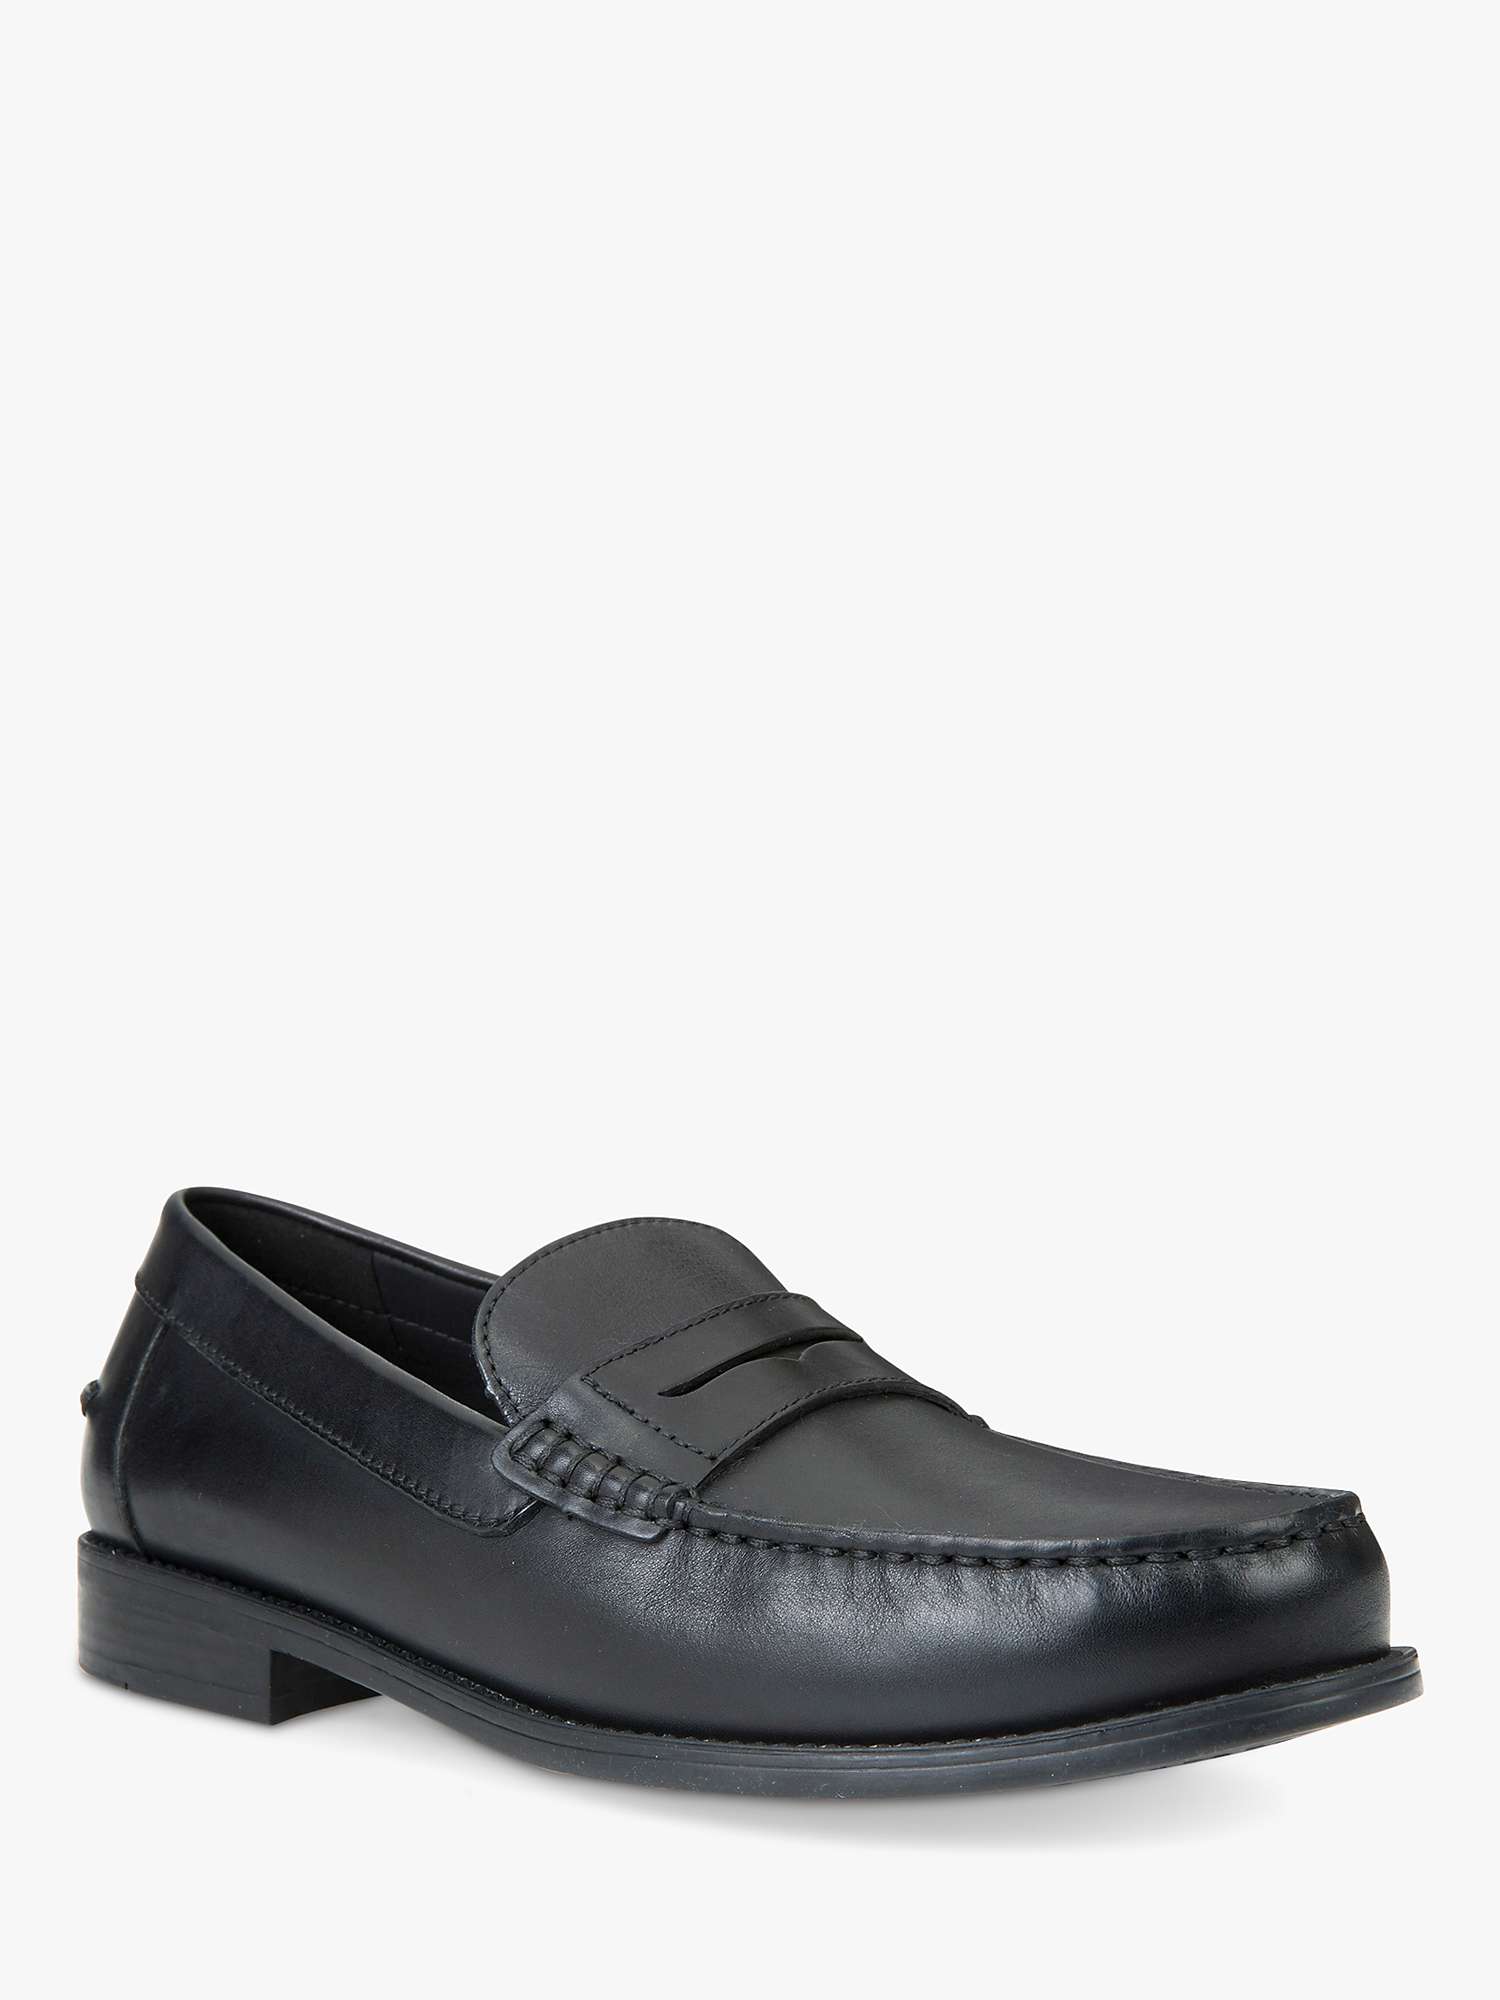 Buy Geox New Damon Loafers, Black Online at johnlewis.com